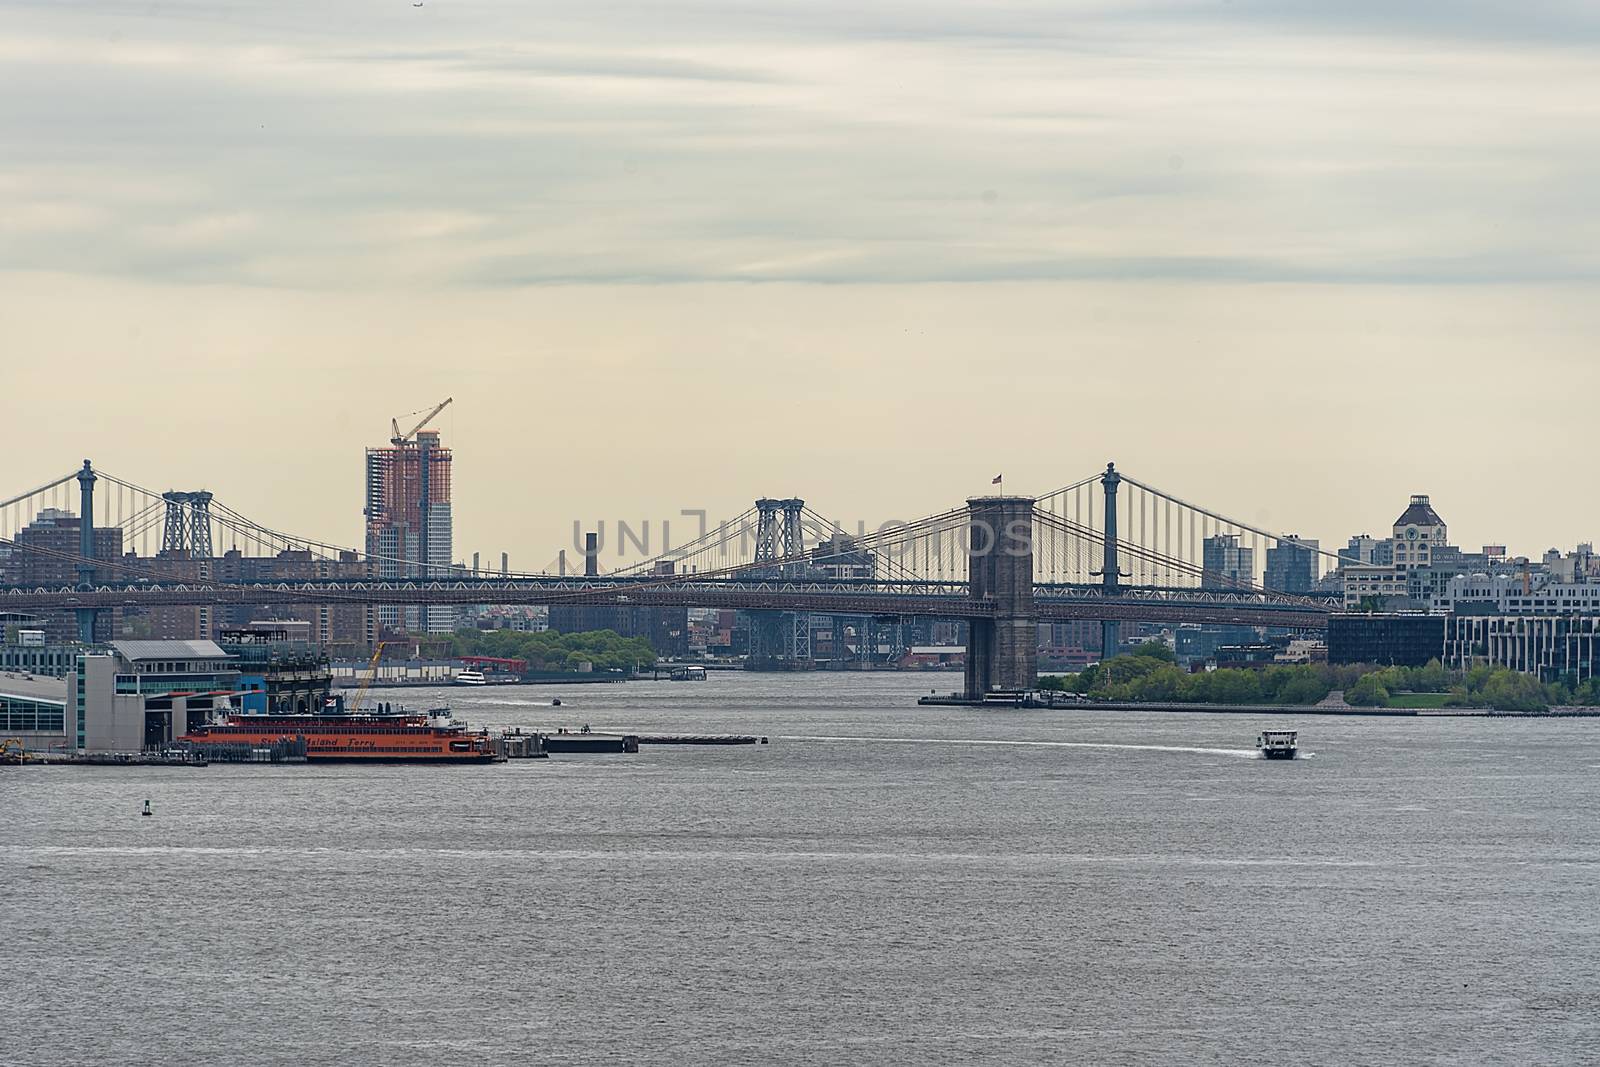 USA, New York, Staten Island - May 2019: View of New York and the Brooklyn and Manhattan bridges